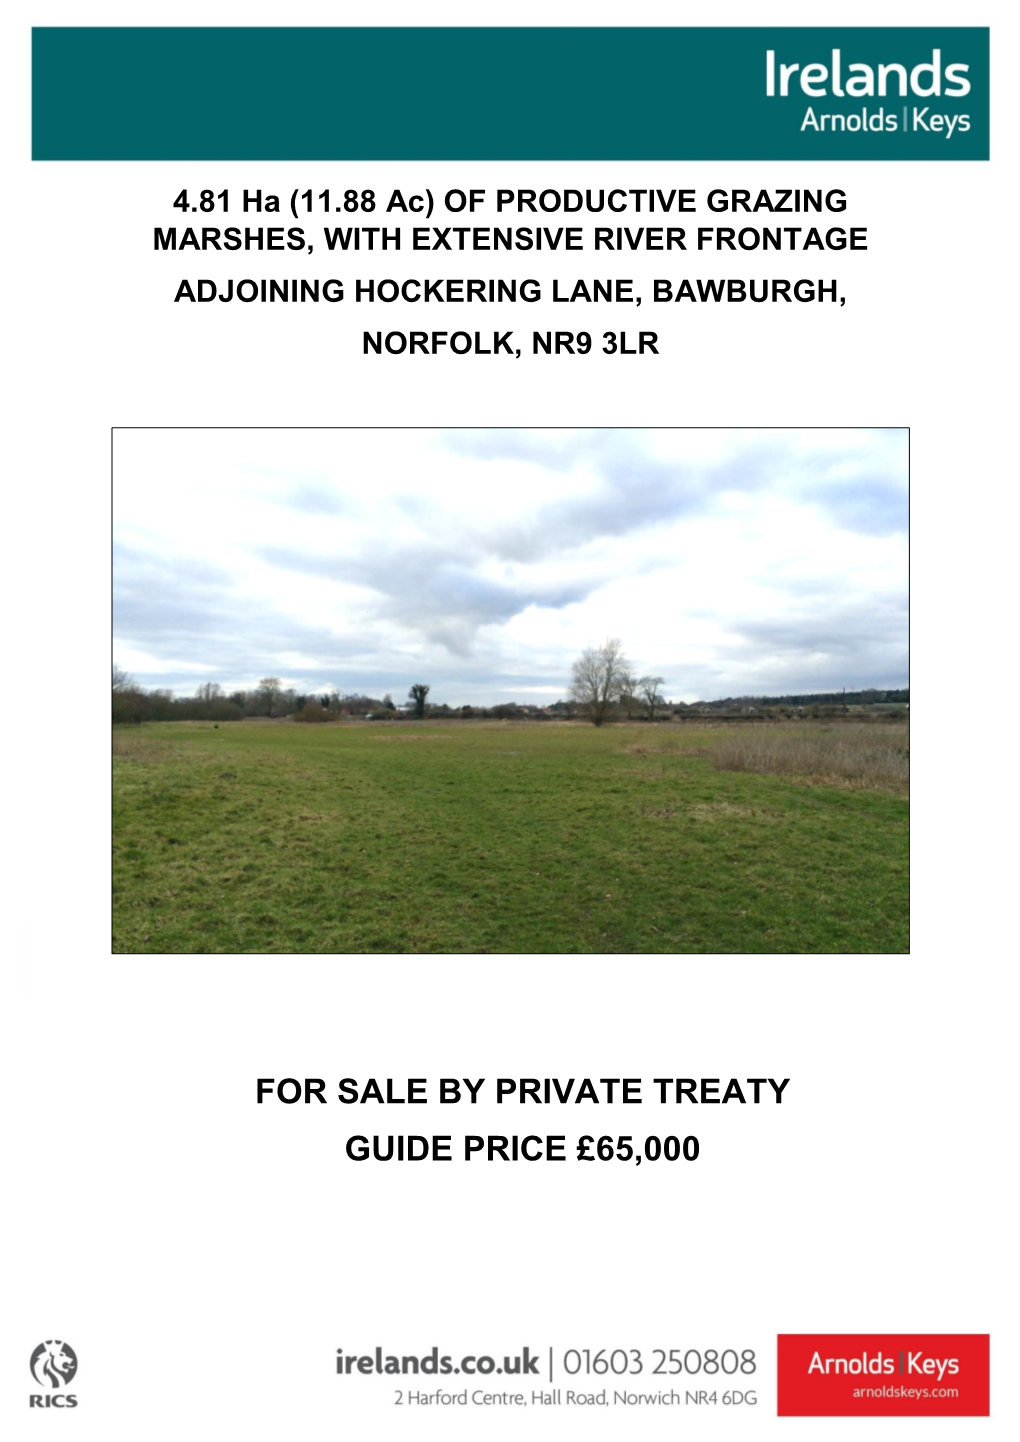 For Sale by Private Treaty Guide Price £65,000